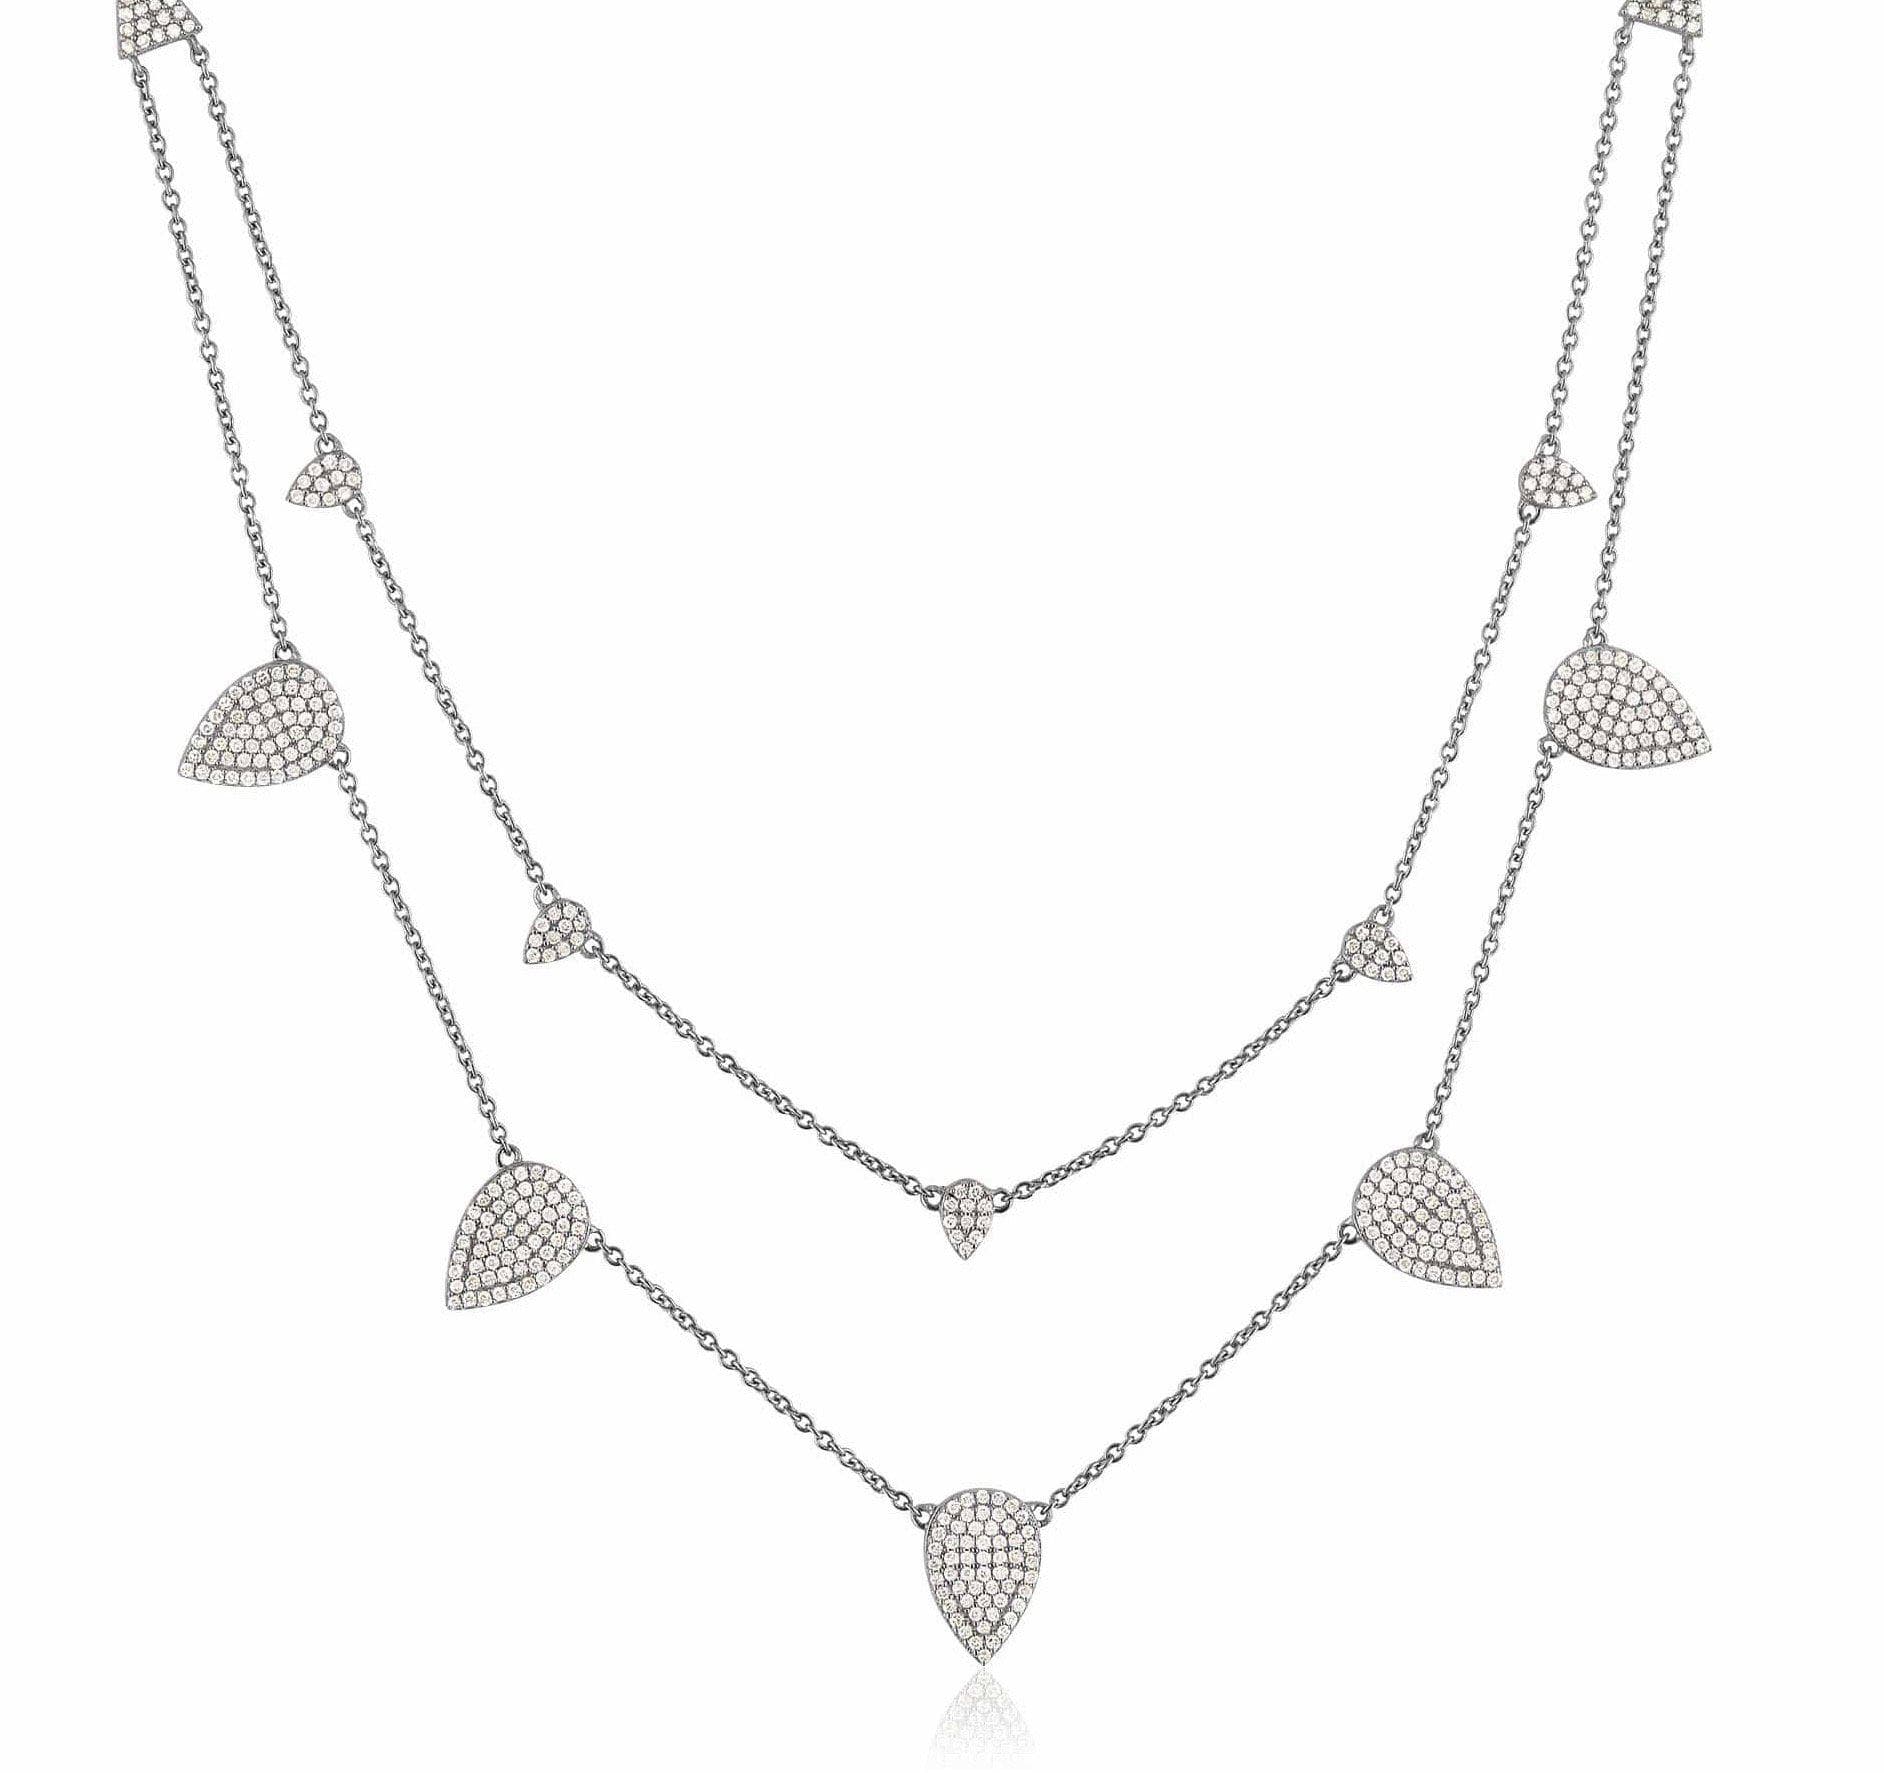 ela rae double pear necklace diamond sterling silver